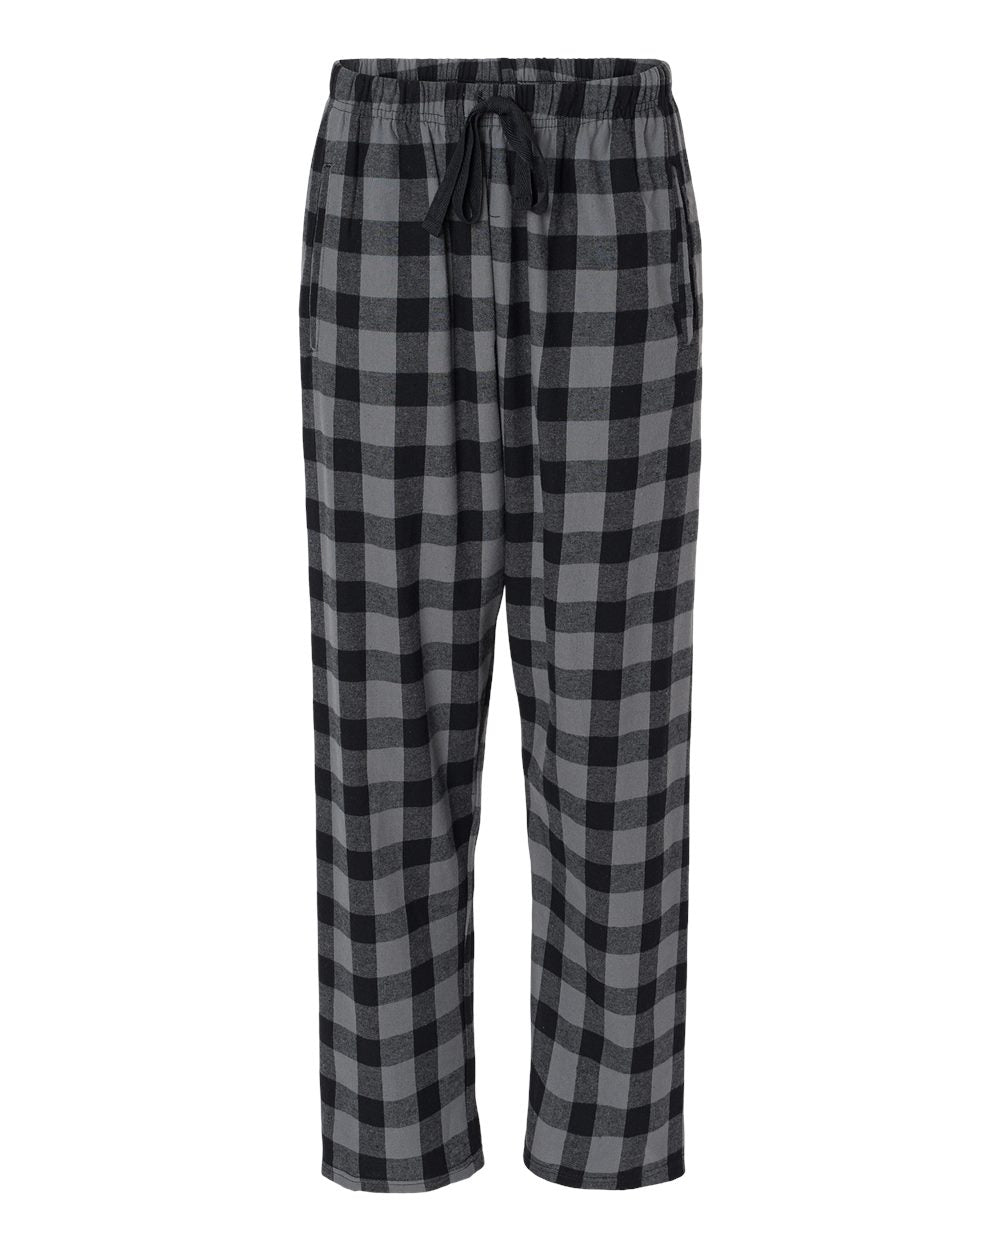 Boxercraft Ladies Haley Flannel Pants Charcoal and Black Buffalo Color Pants with Custom Text